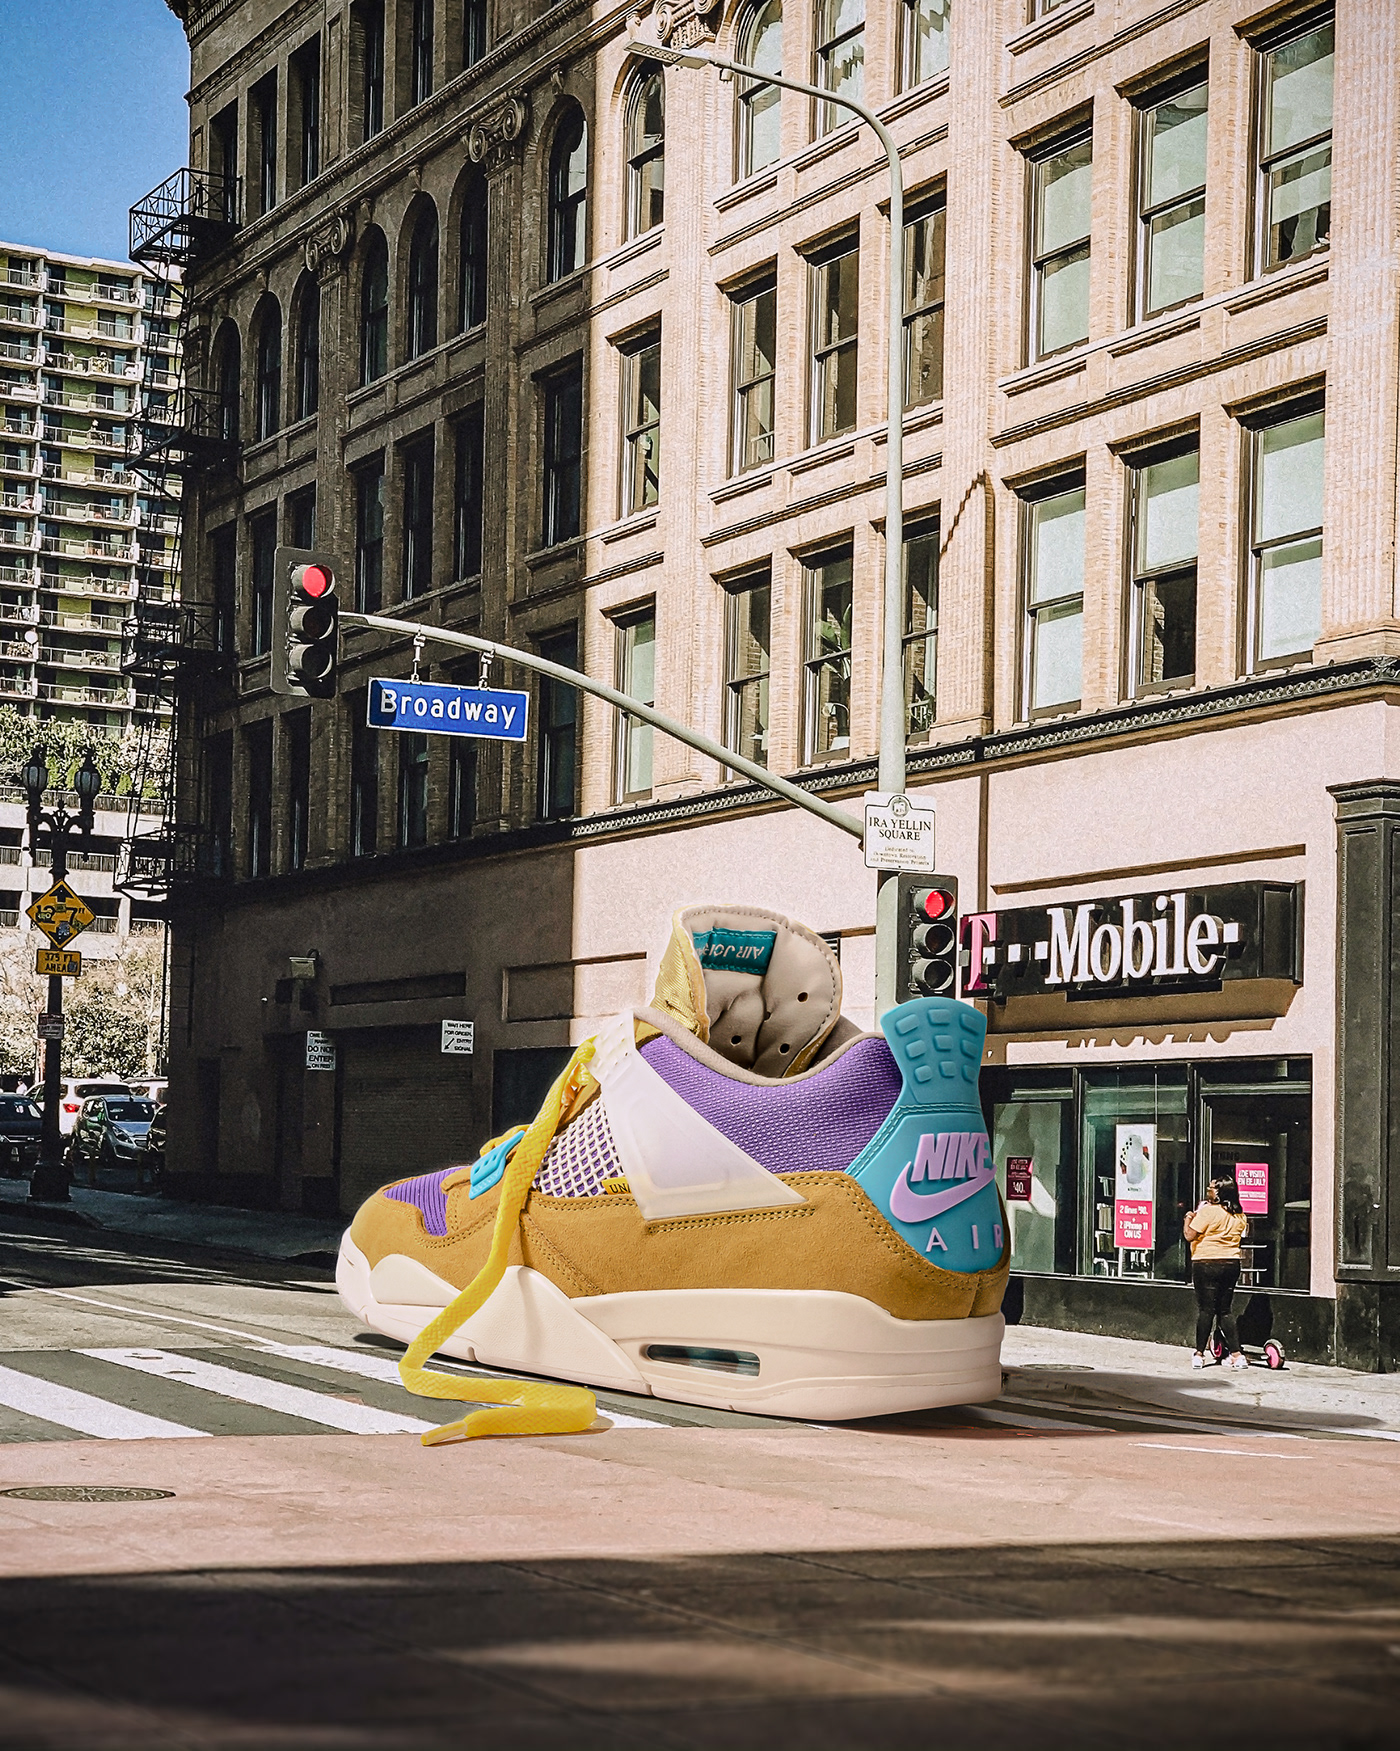 Giant sneaker photo composite on the street . Retouching using Photoshop